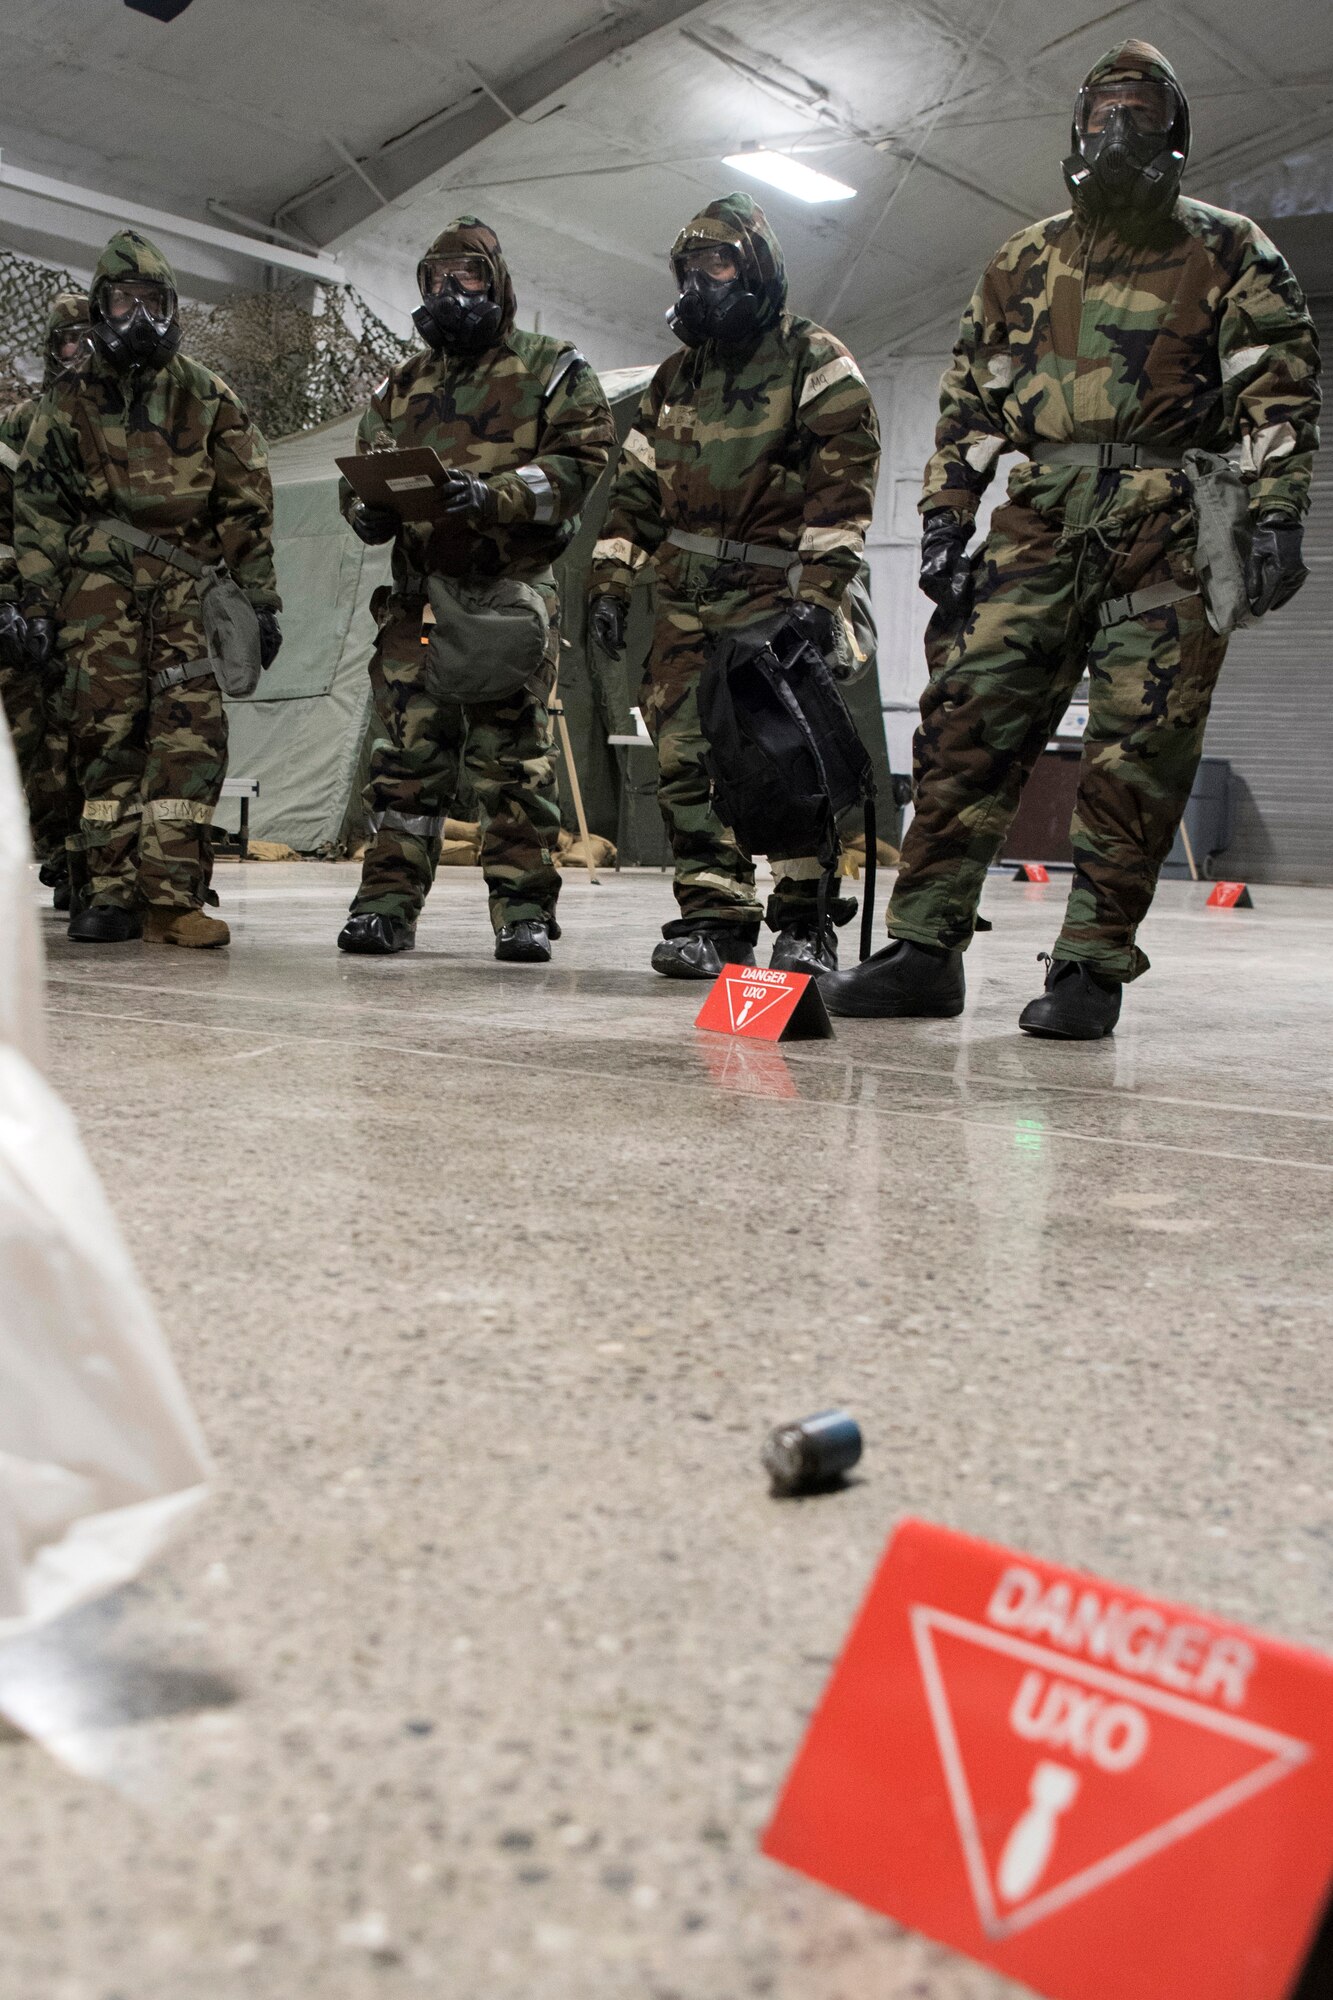 A group of U.S. Air Force Airmen cordon an area after a simulated initial release during a newly-implemented chemical, biological, radiological and nuclear defense training course exercise at Joint Base Elmendorf-Richardson, Alaska, Jan. 8, 2019. One of the key changes made embraces the reintegration of hands-on, in-person instruction, and reduces computer based training, allowing Airmen to receive a more tailored learning experience. (U.S. Air Force photo by Airman 1st Class Crystal A. Jenkins)